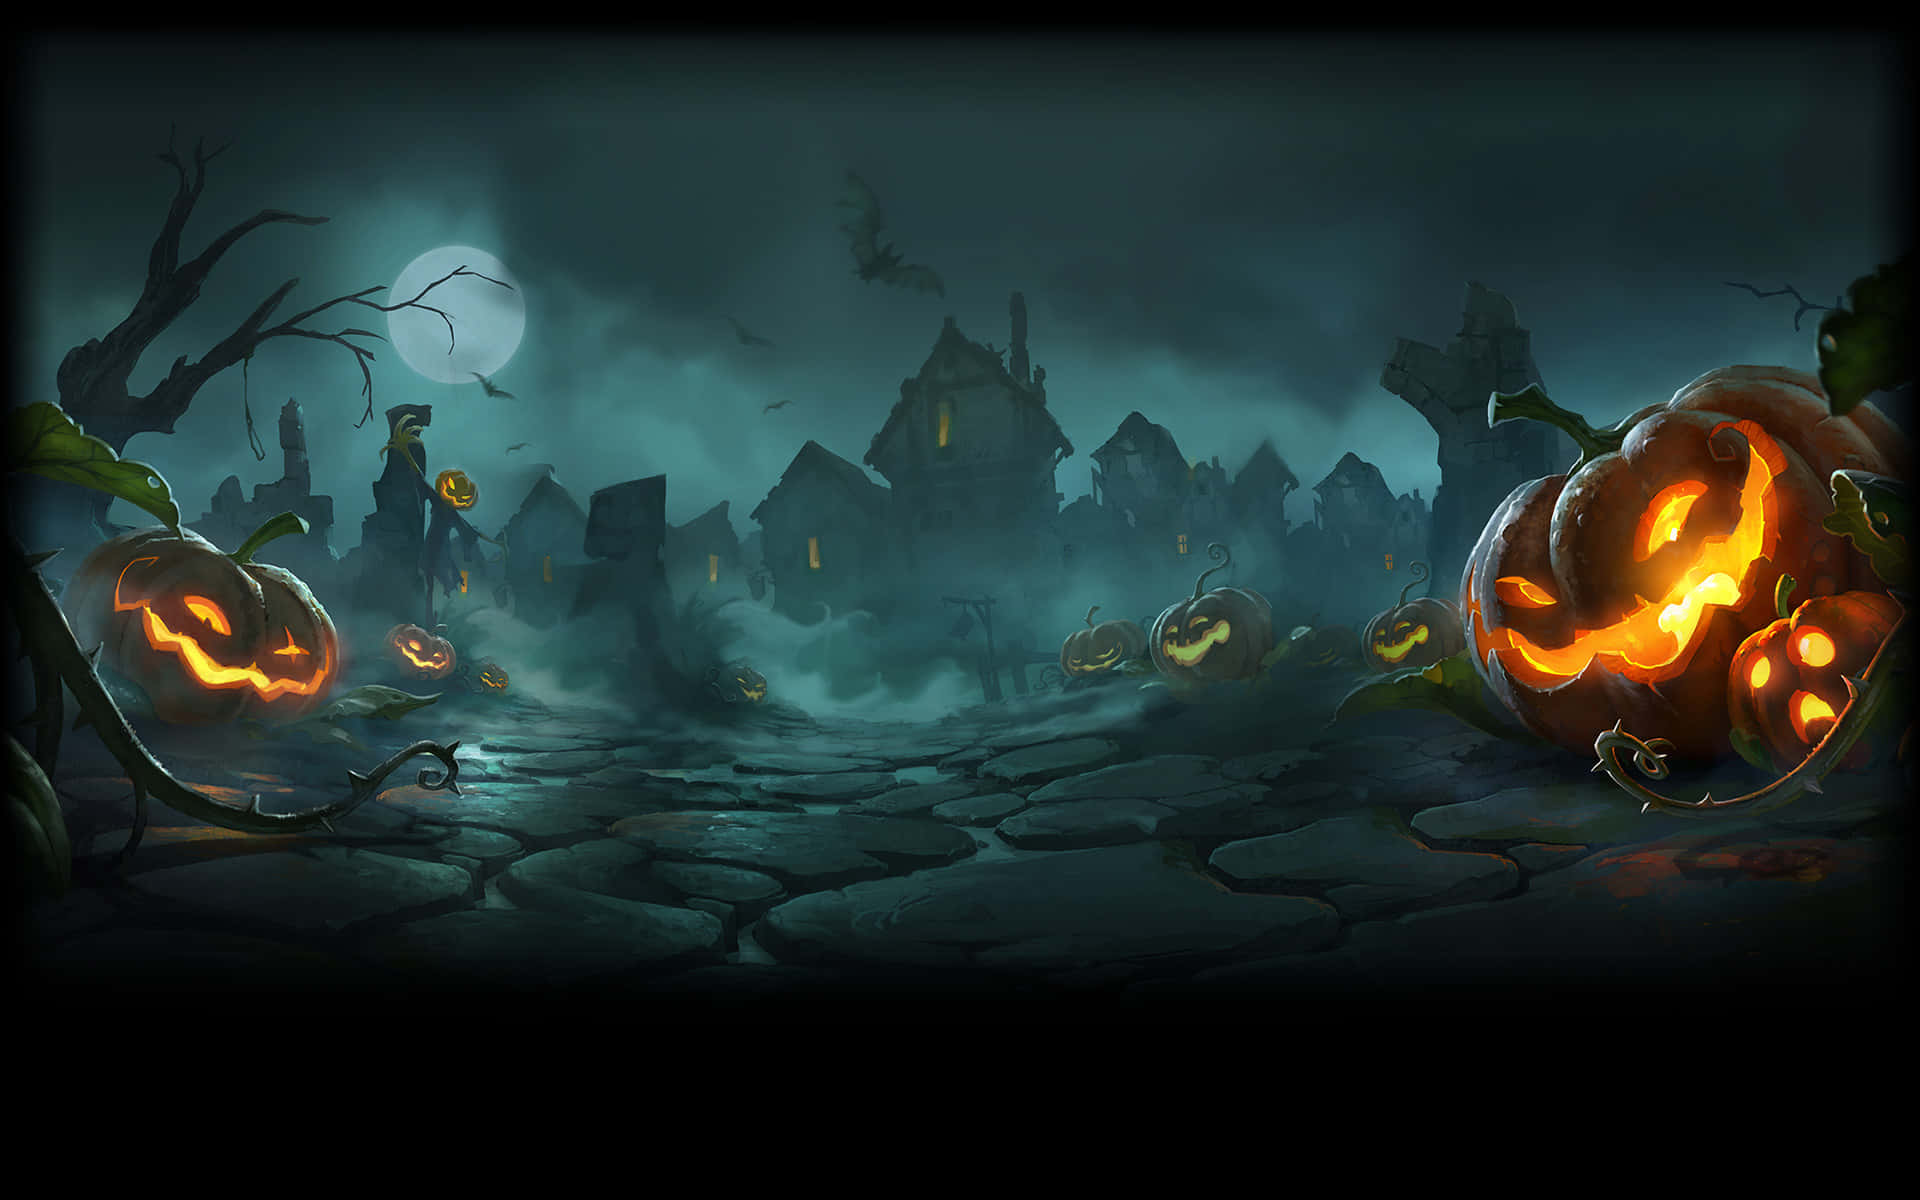 Have a spine-tingling Halloween!